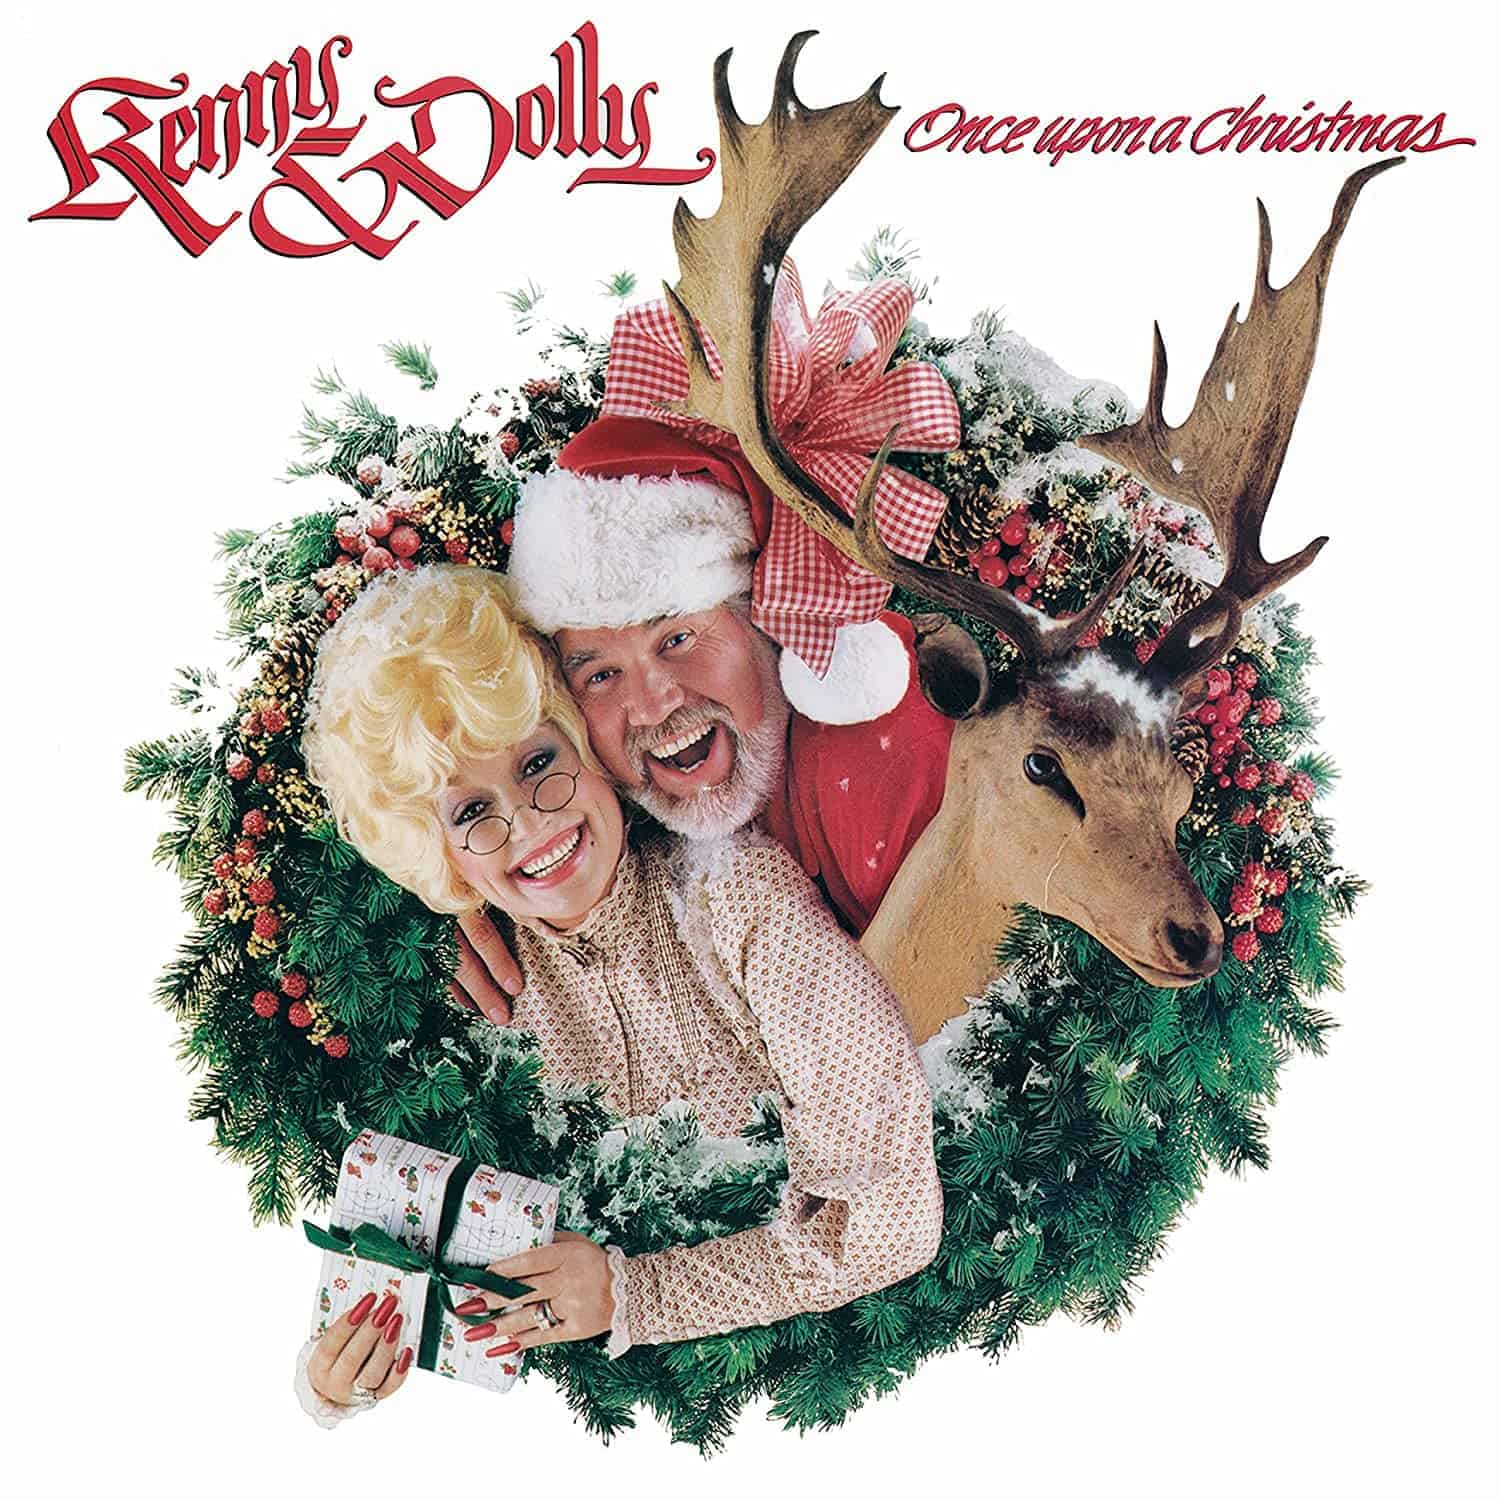 KENNY ROGERS AND DOLLY PARTON - ONCE UPON A CHRISTMAS